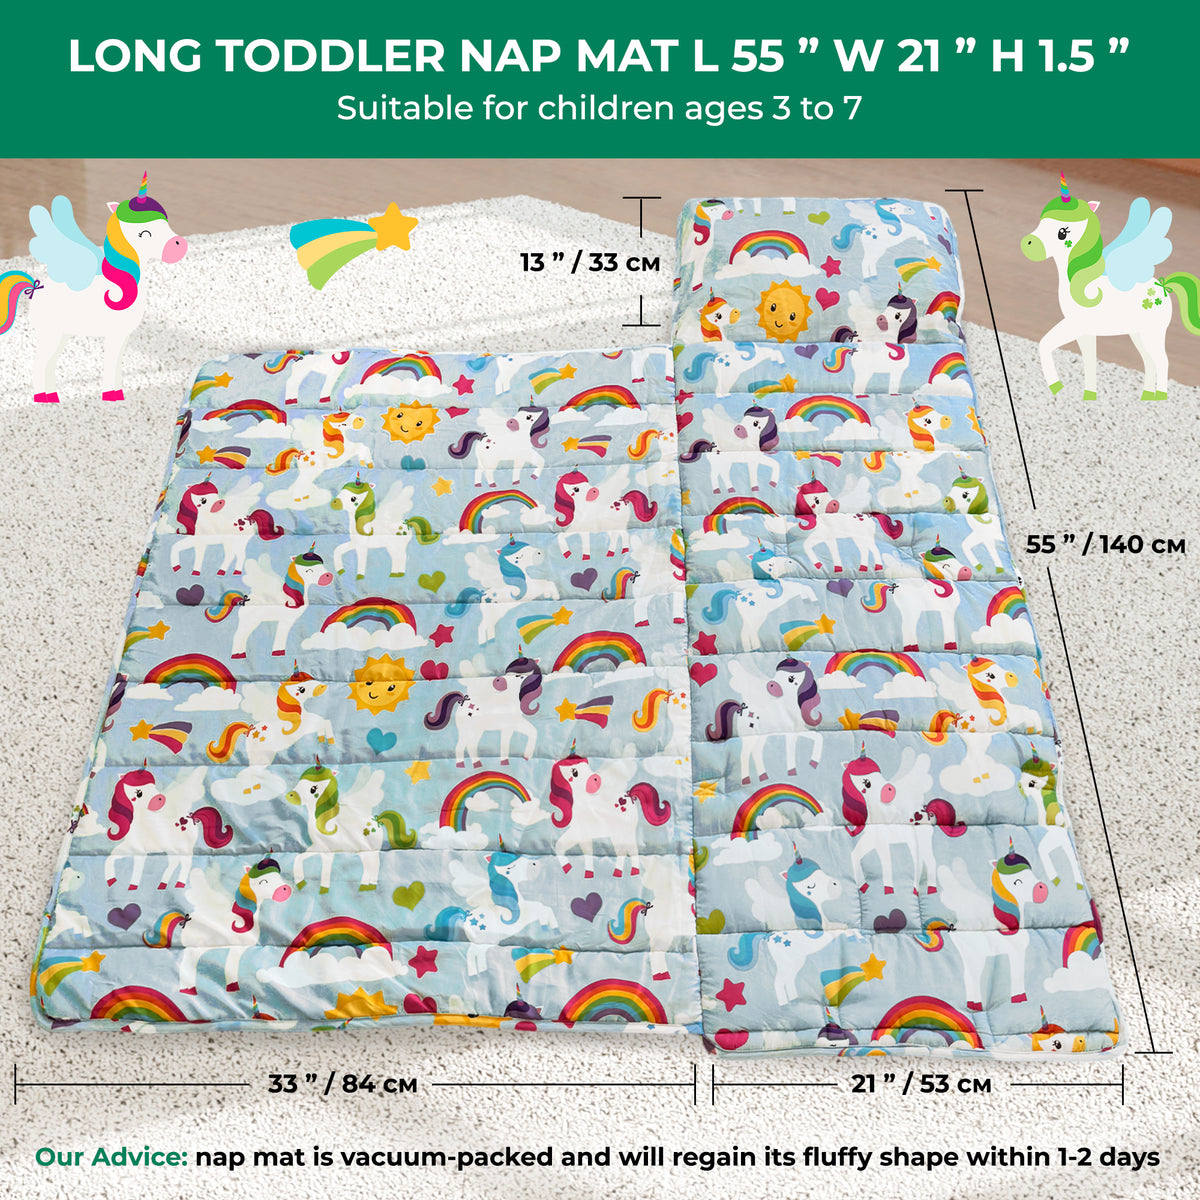 Toddler Nap Mat with Removable Pillow, Wide Blanket | 55" х 21" | Age 3-7 | Unicorns